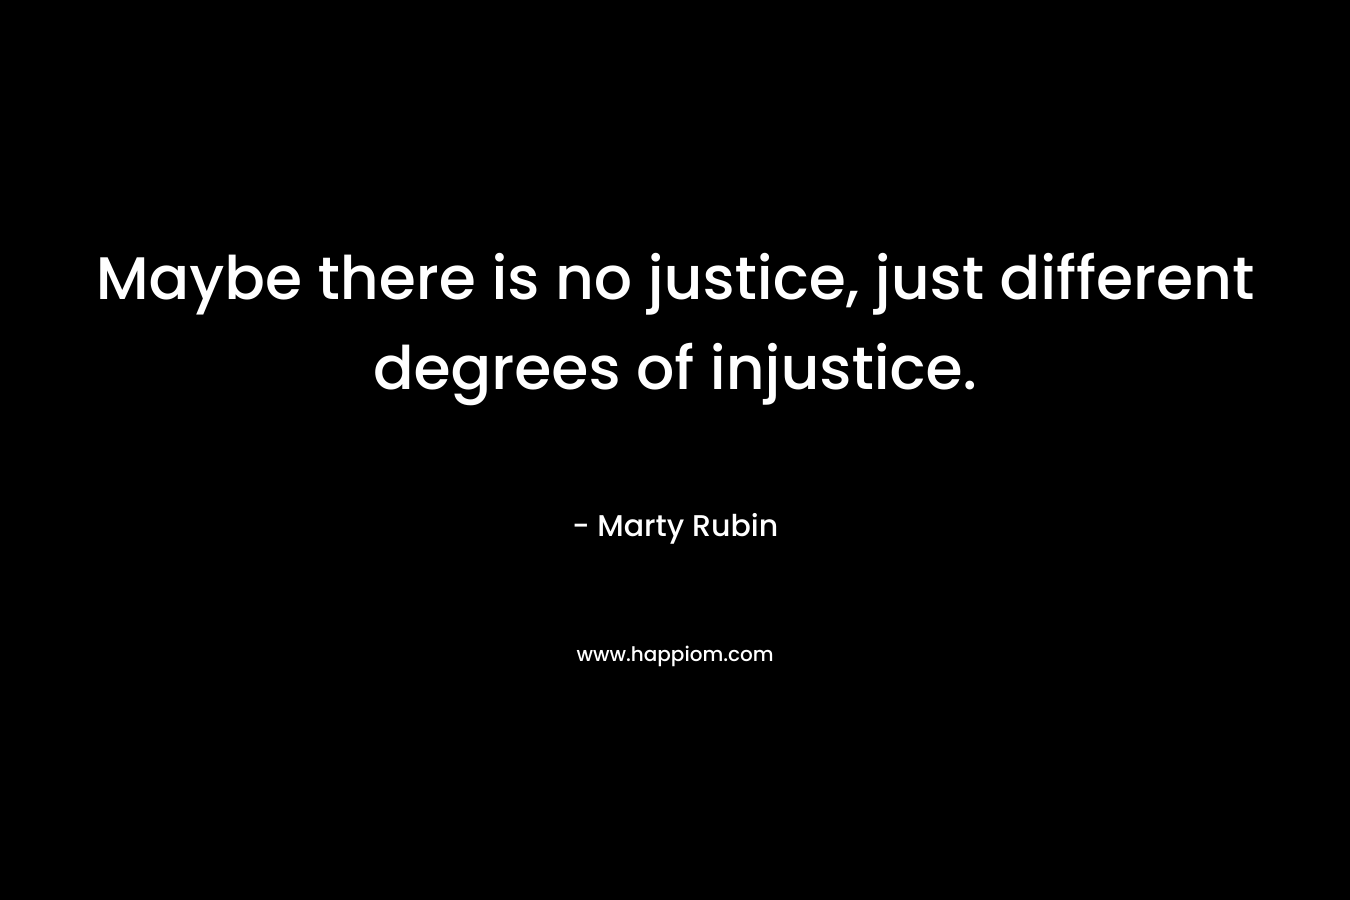 Maybe there is no justice, just different degrees of injustice.